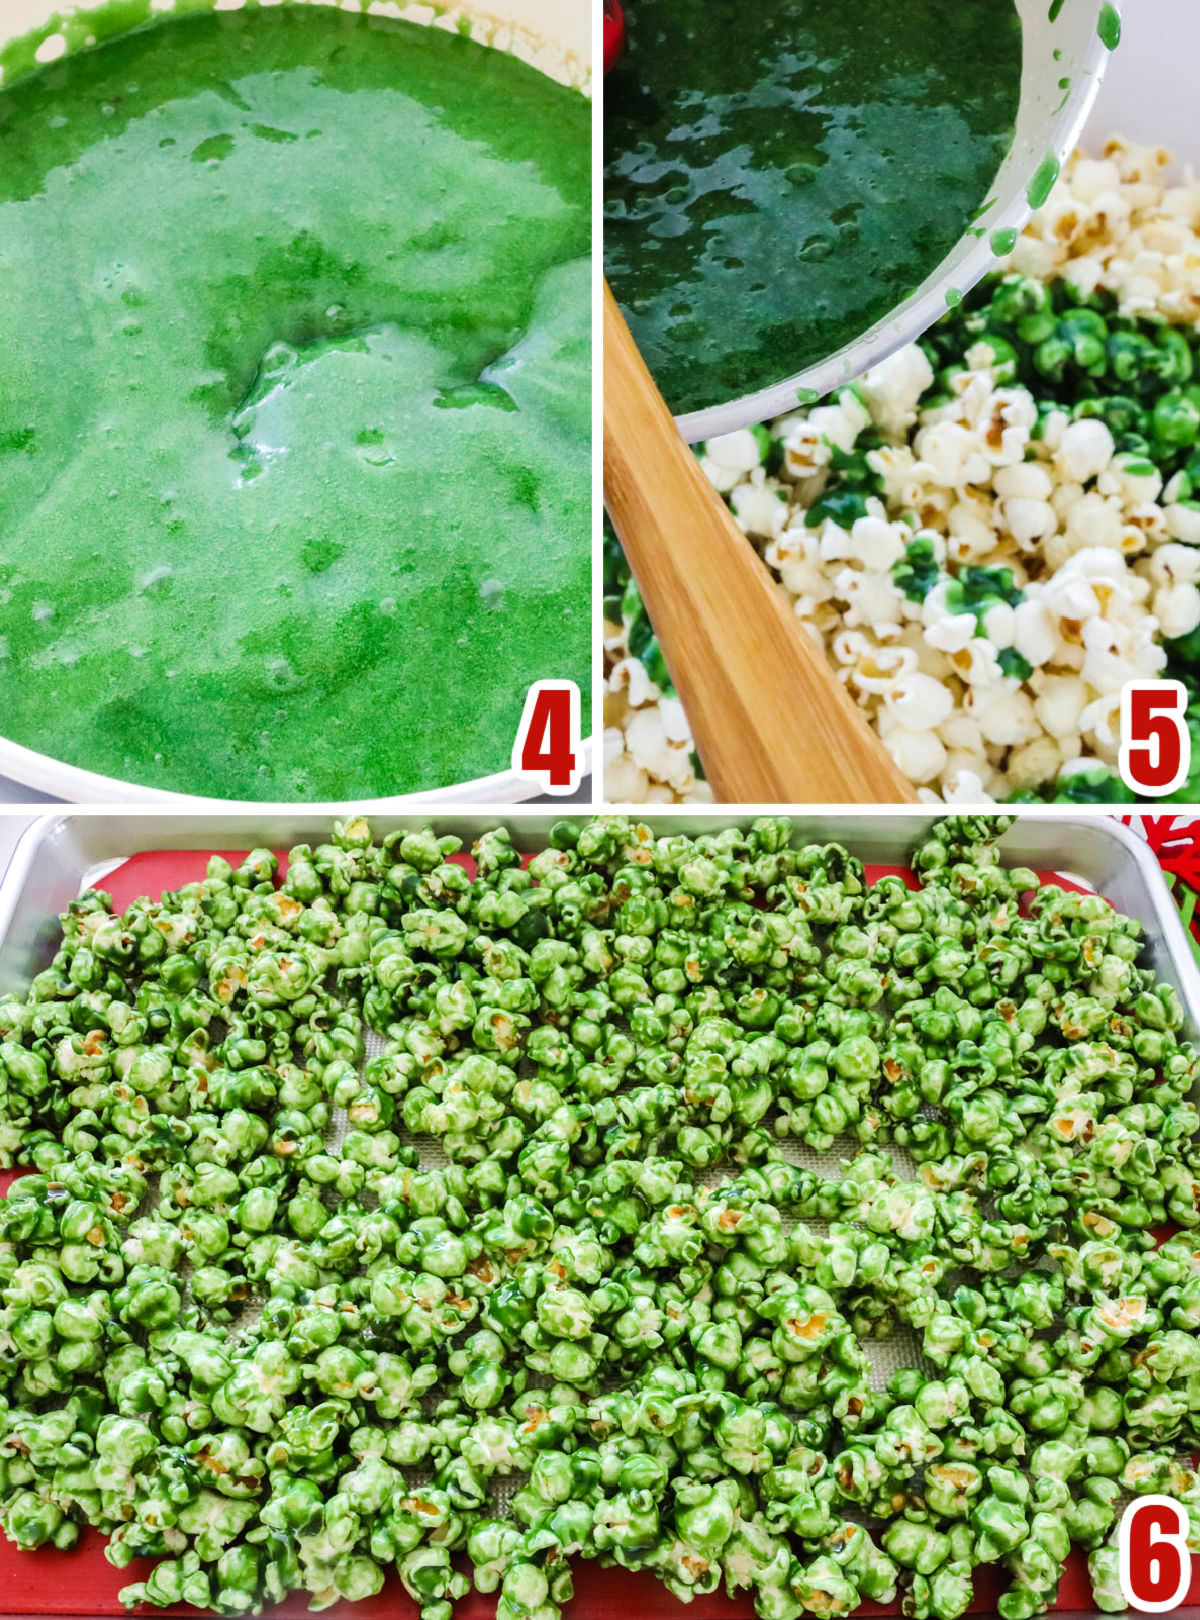 Collage image showing the steps for creating the green Caramel Corn.